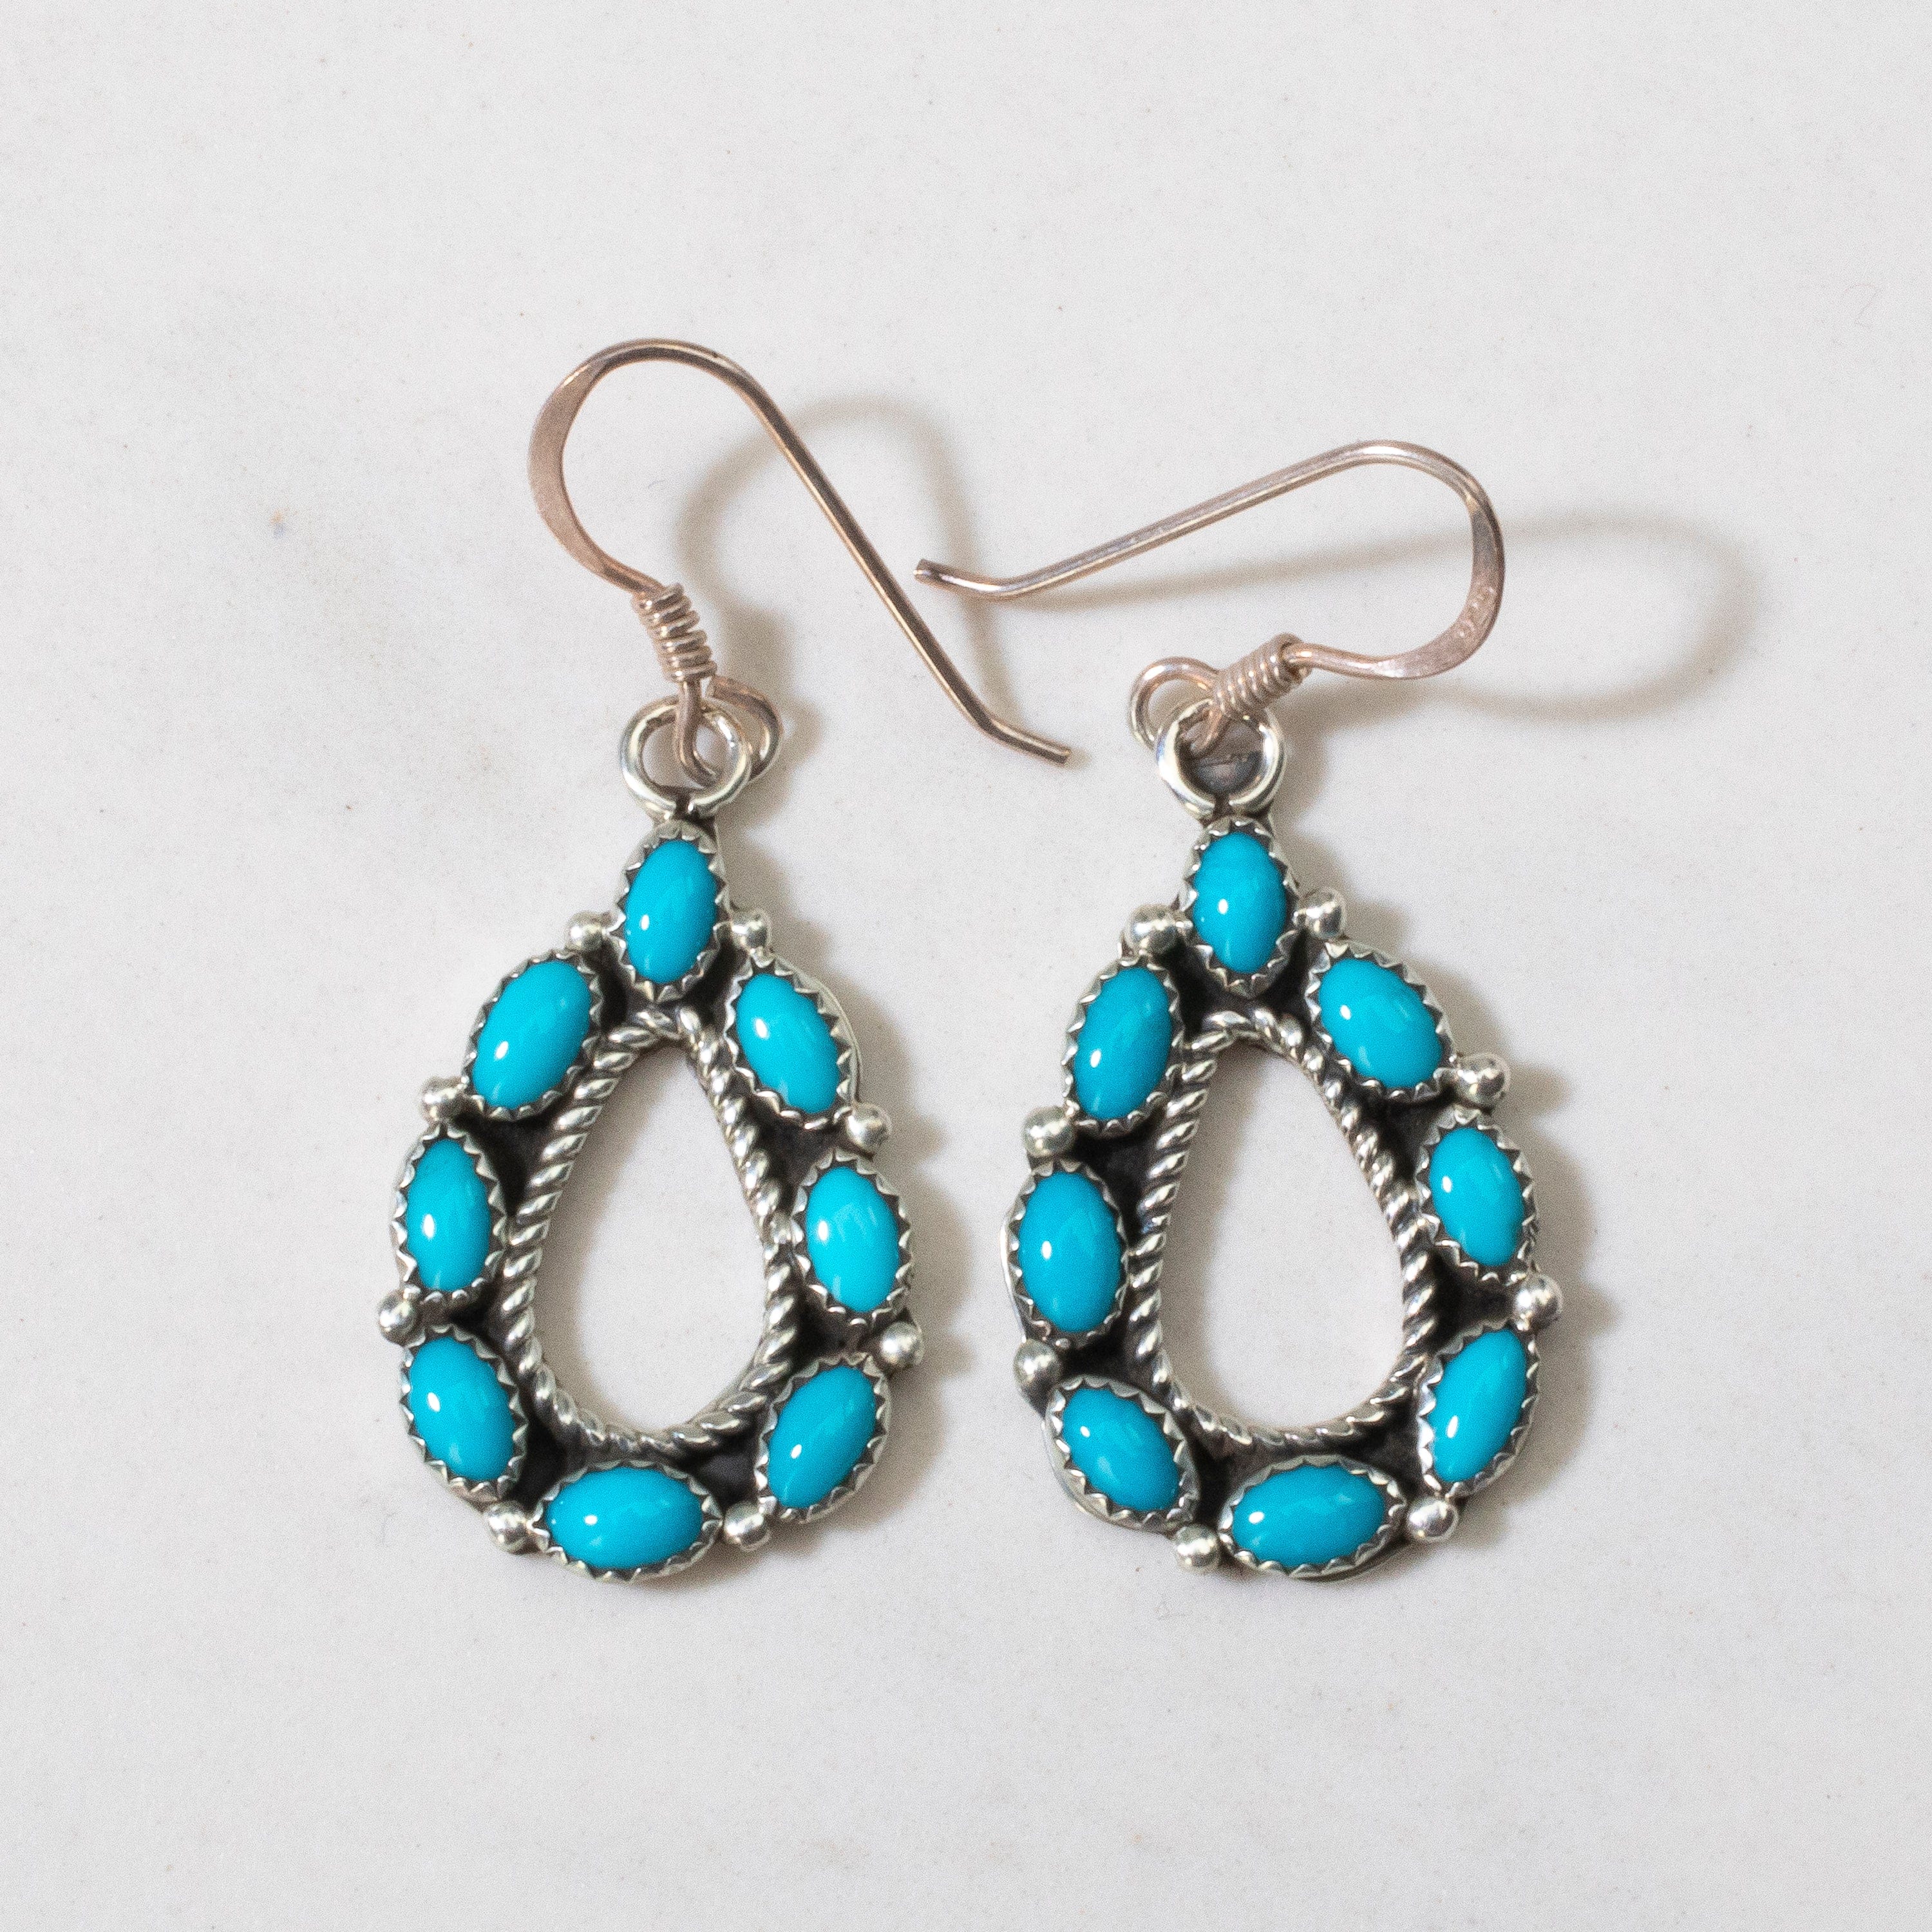 Kalifano Native American Jewelry Sleeping Beauty Turquoise Tear Drop Navajo USA Native American Made 925 Sterling Silver Earrings with French Hook NAE300.033